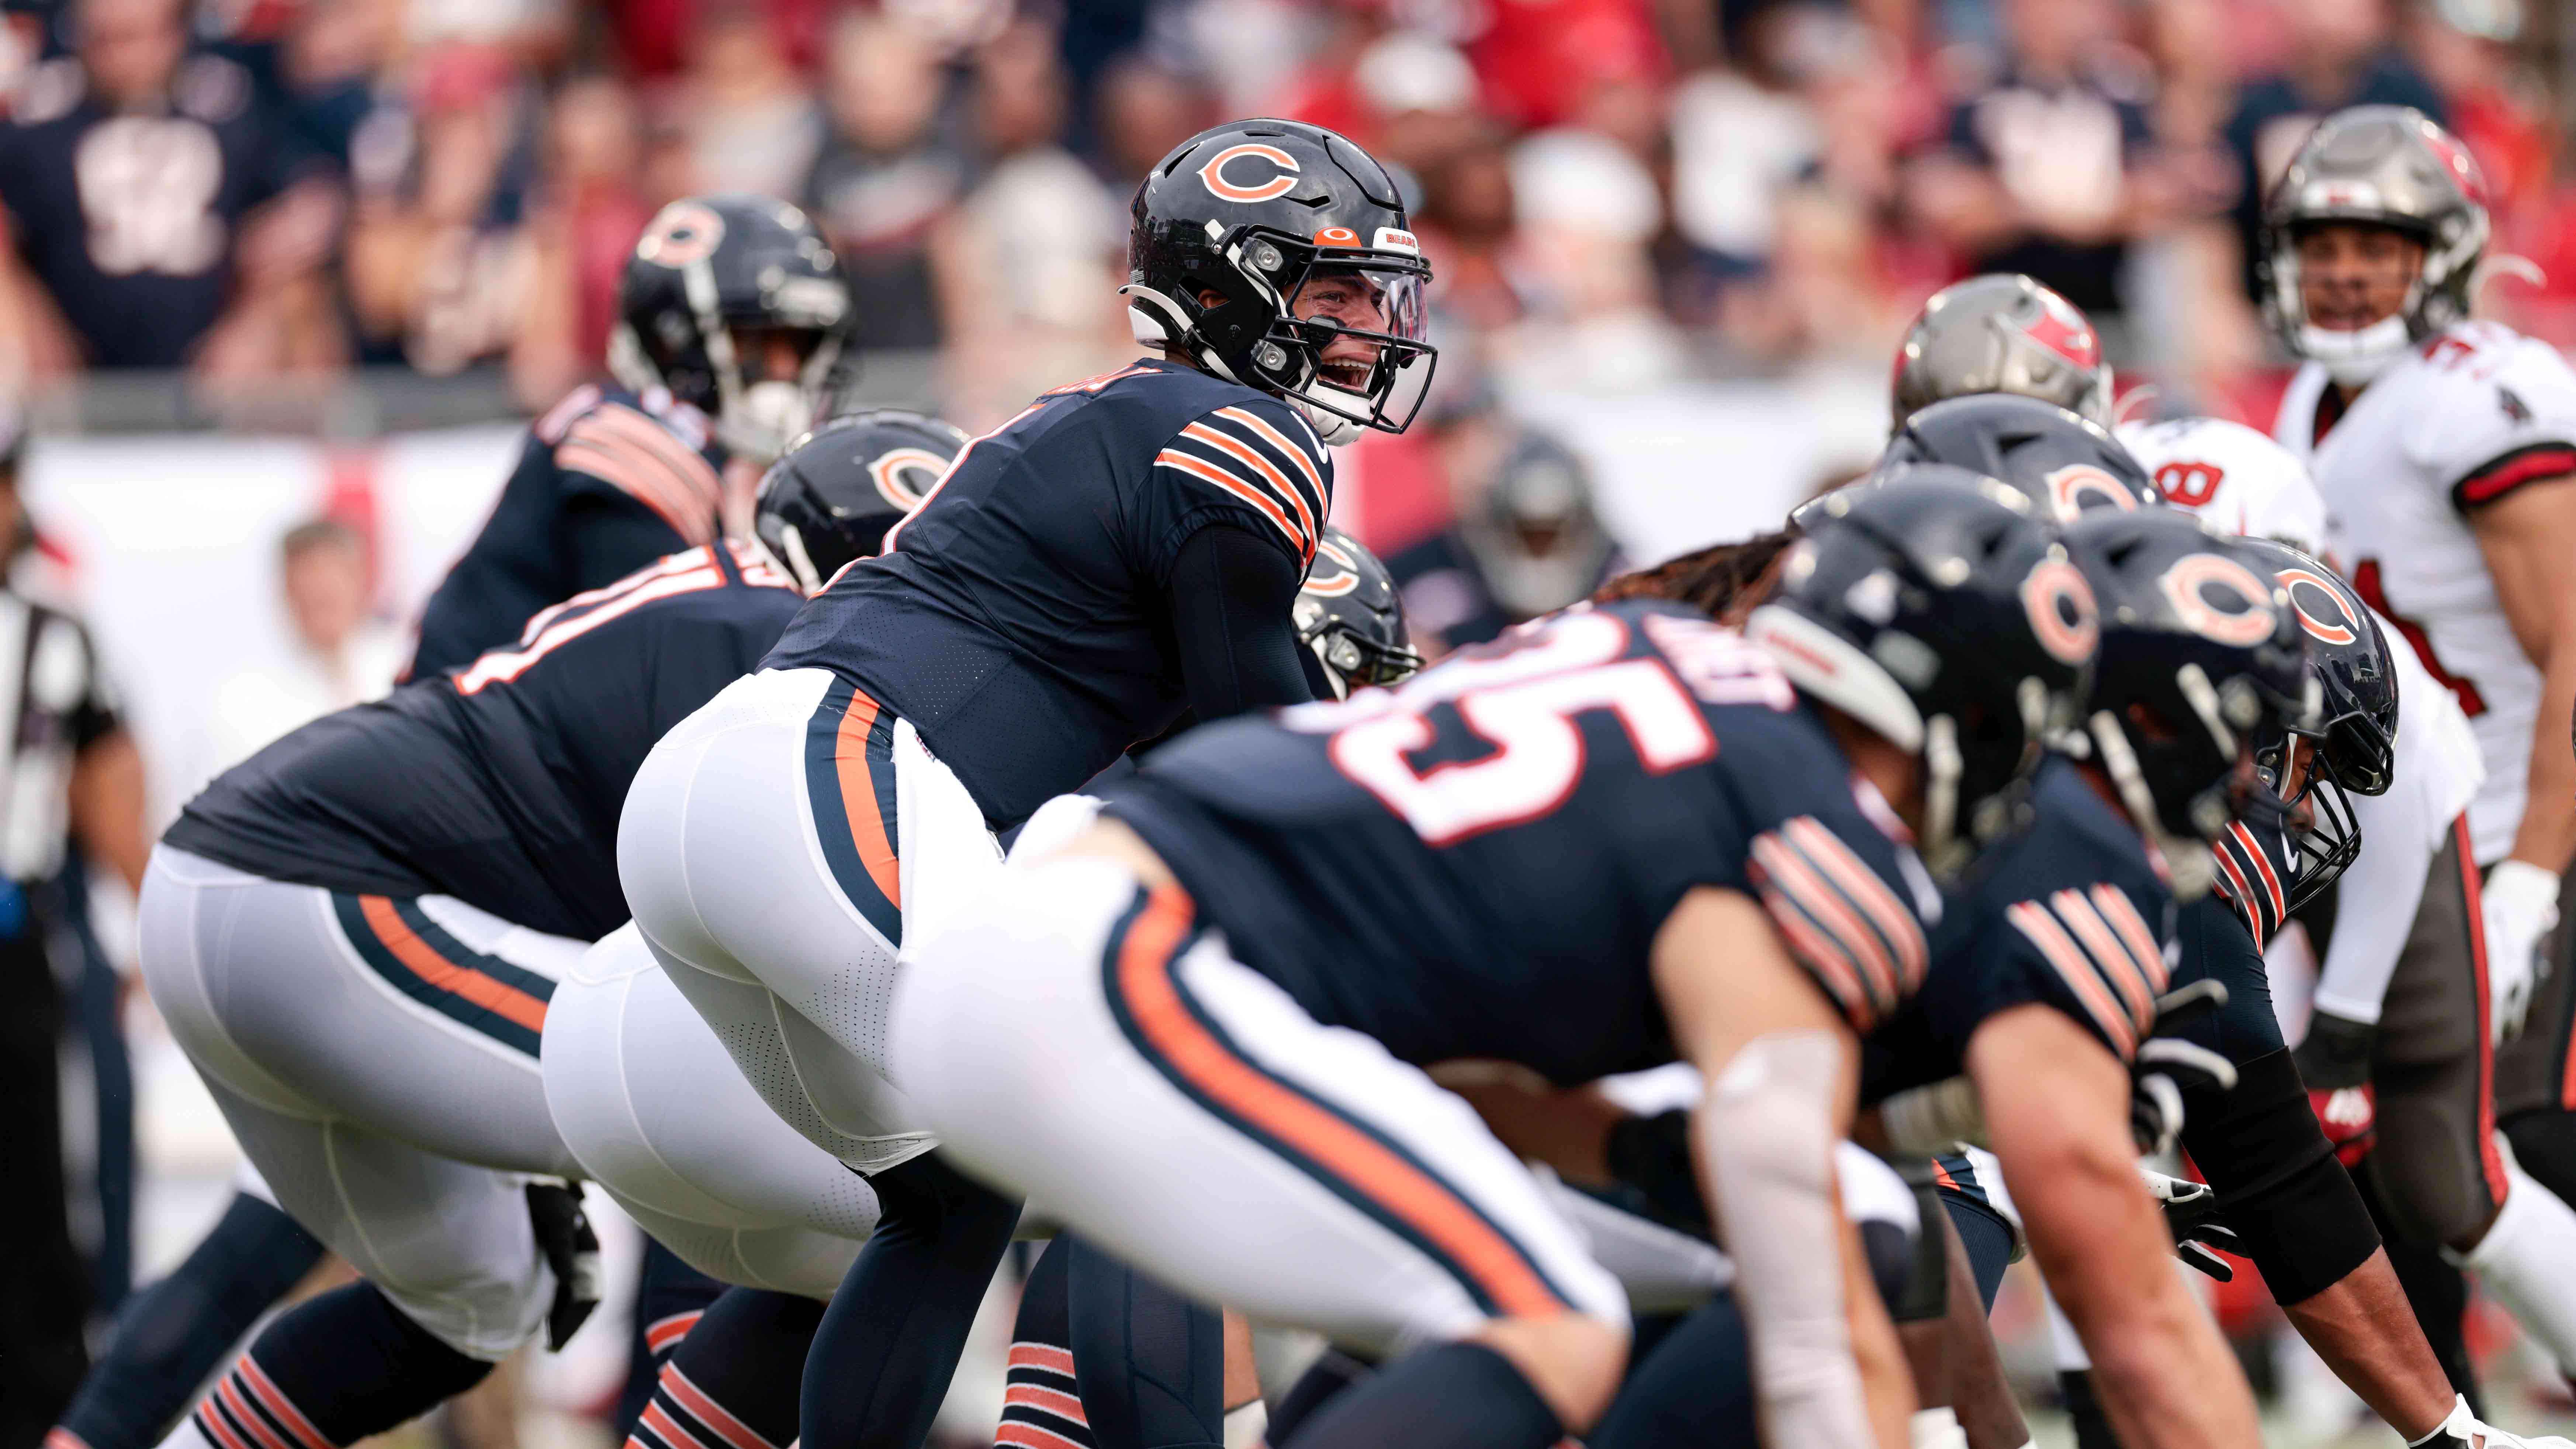 How have the Bears fared on Monday Night Football?